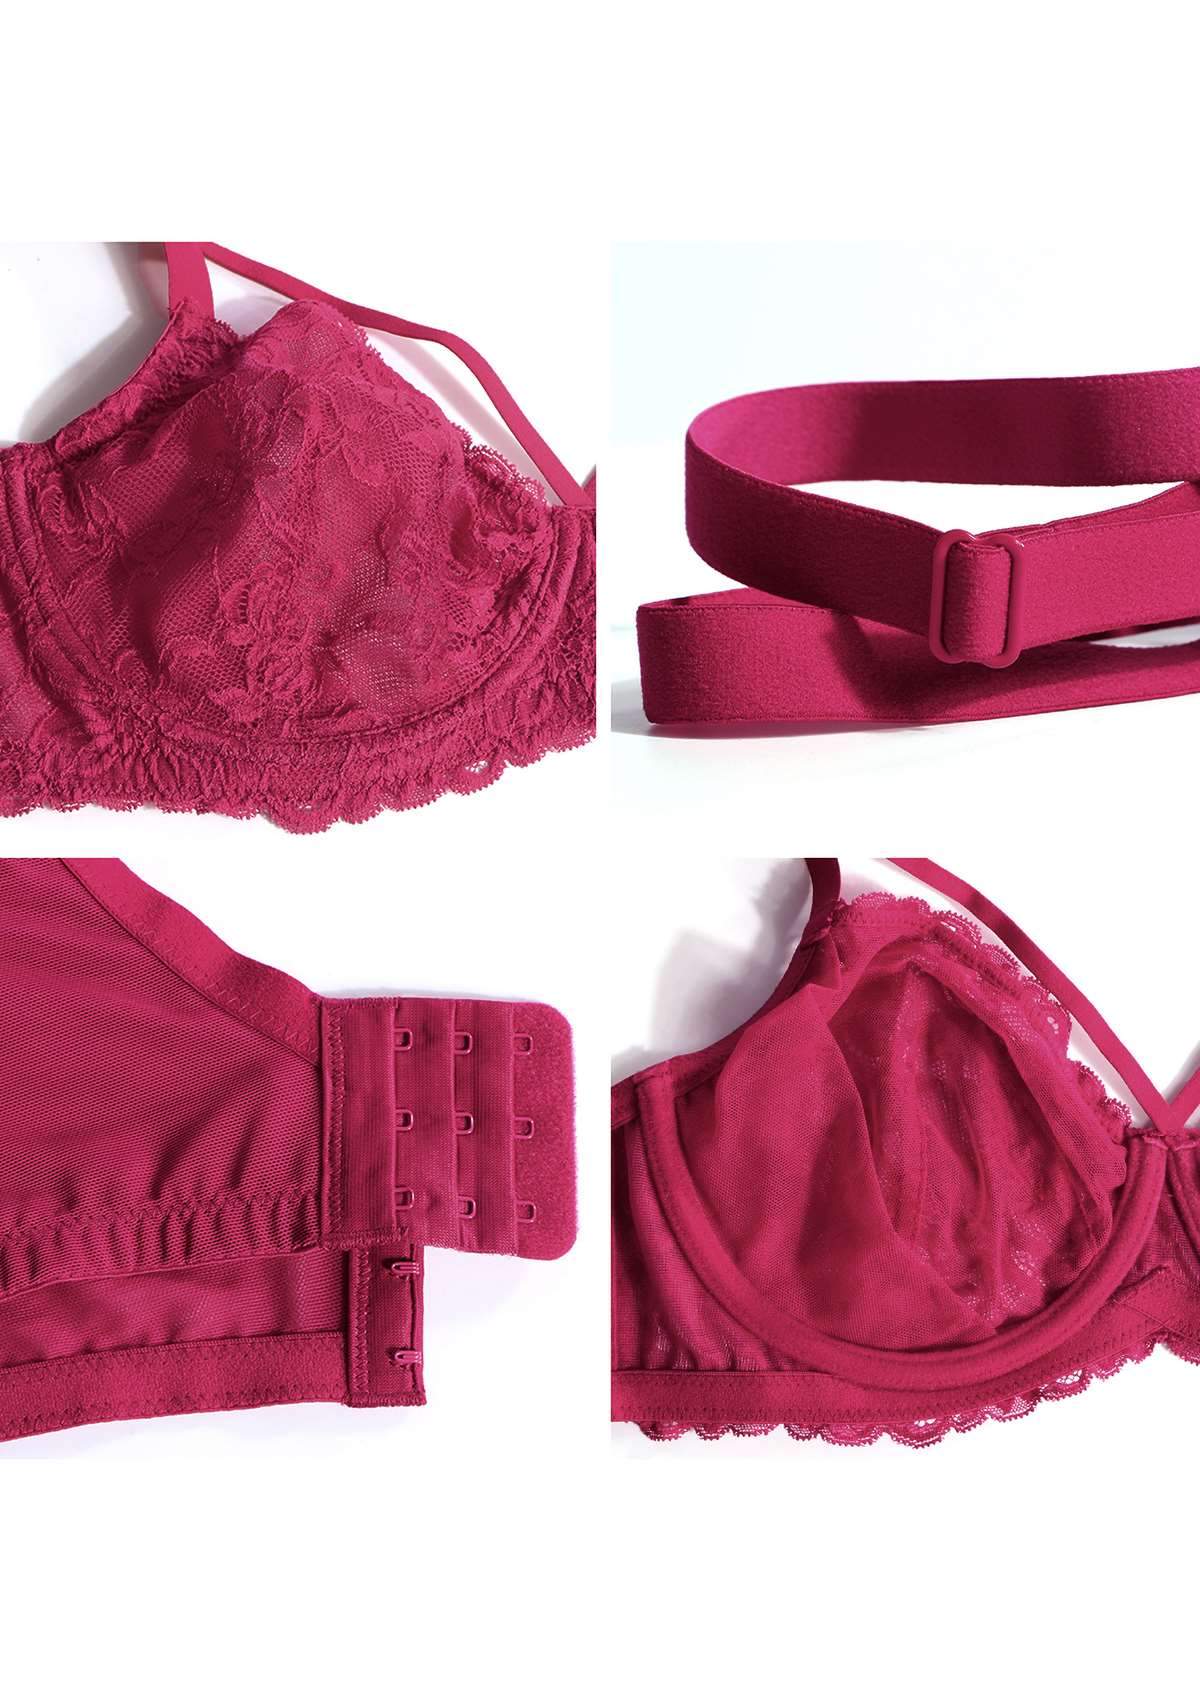 HSIA Pretty In Petals Sexy Lace Bra: Full Coverage Back Smoothing Bra - Red / 46 / C